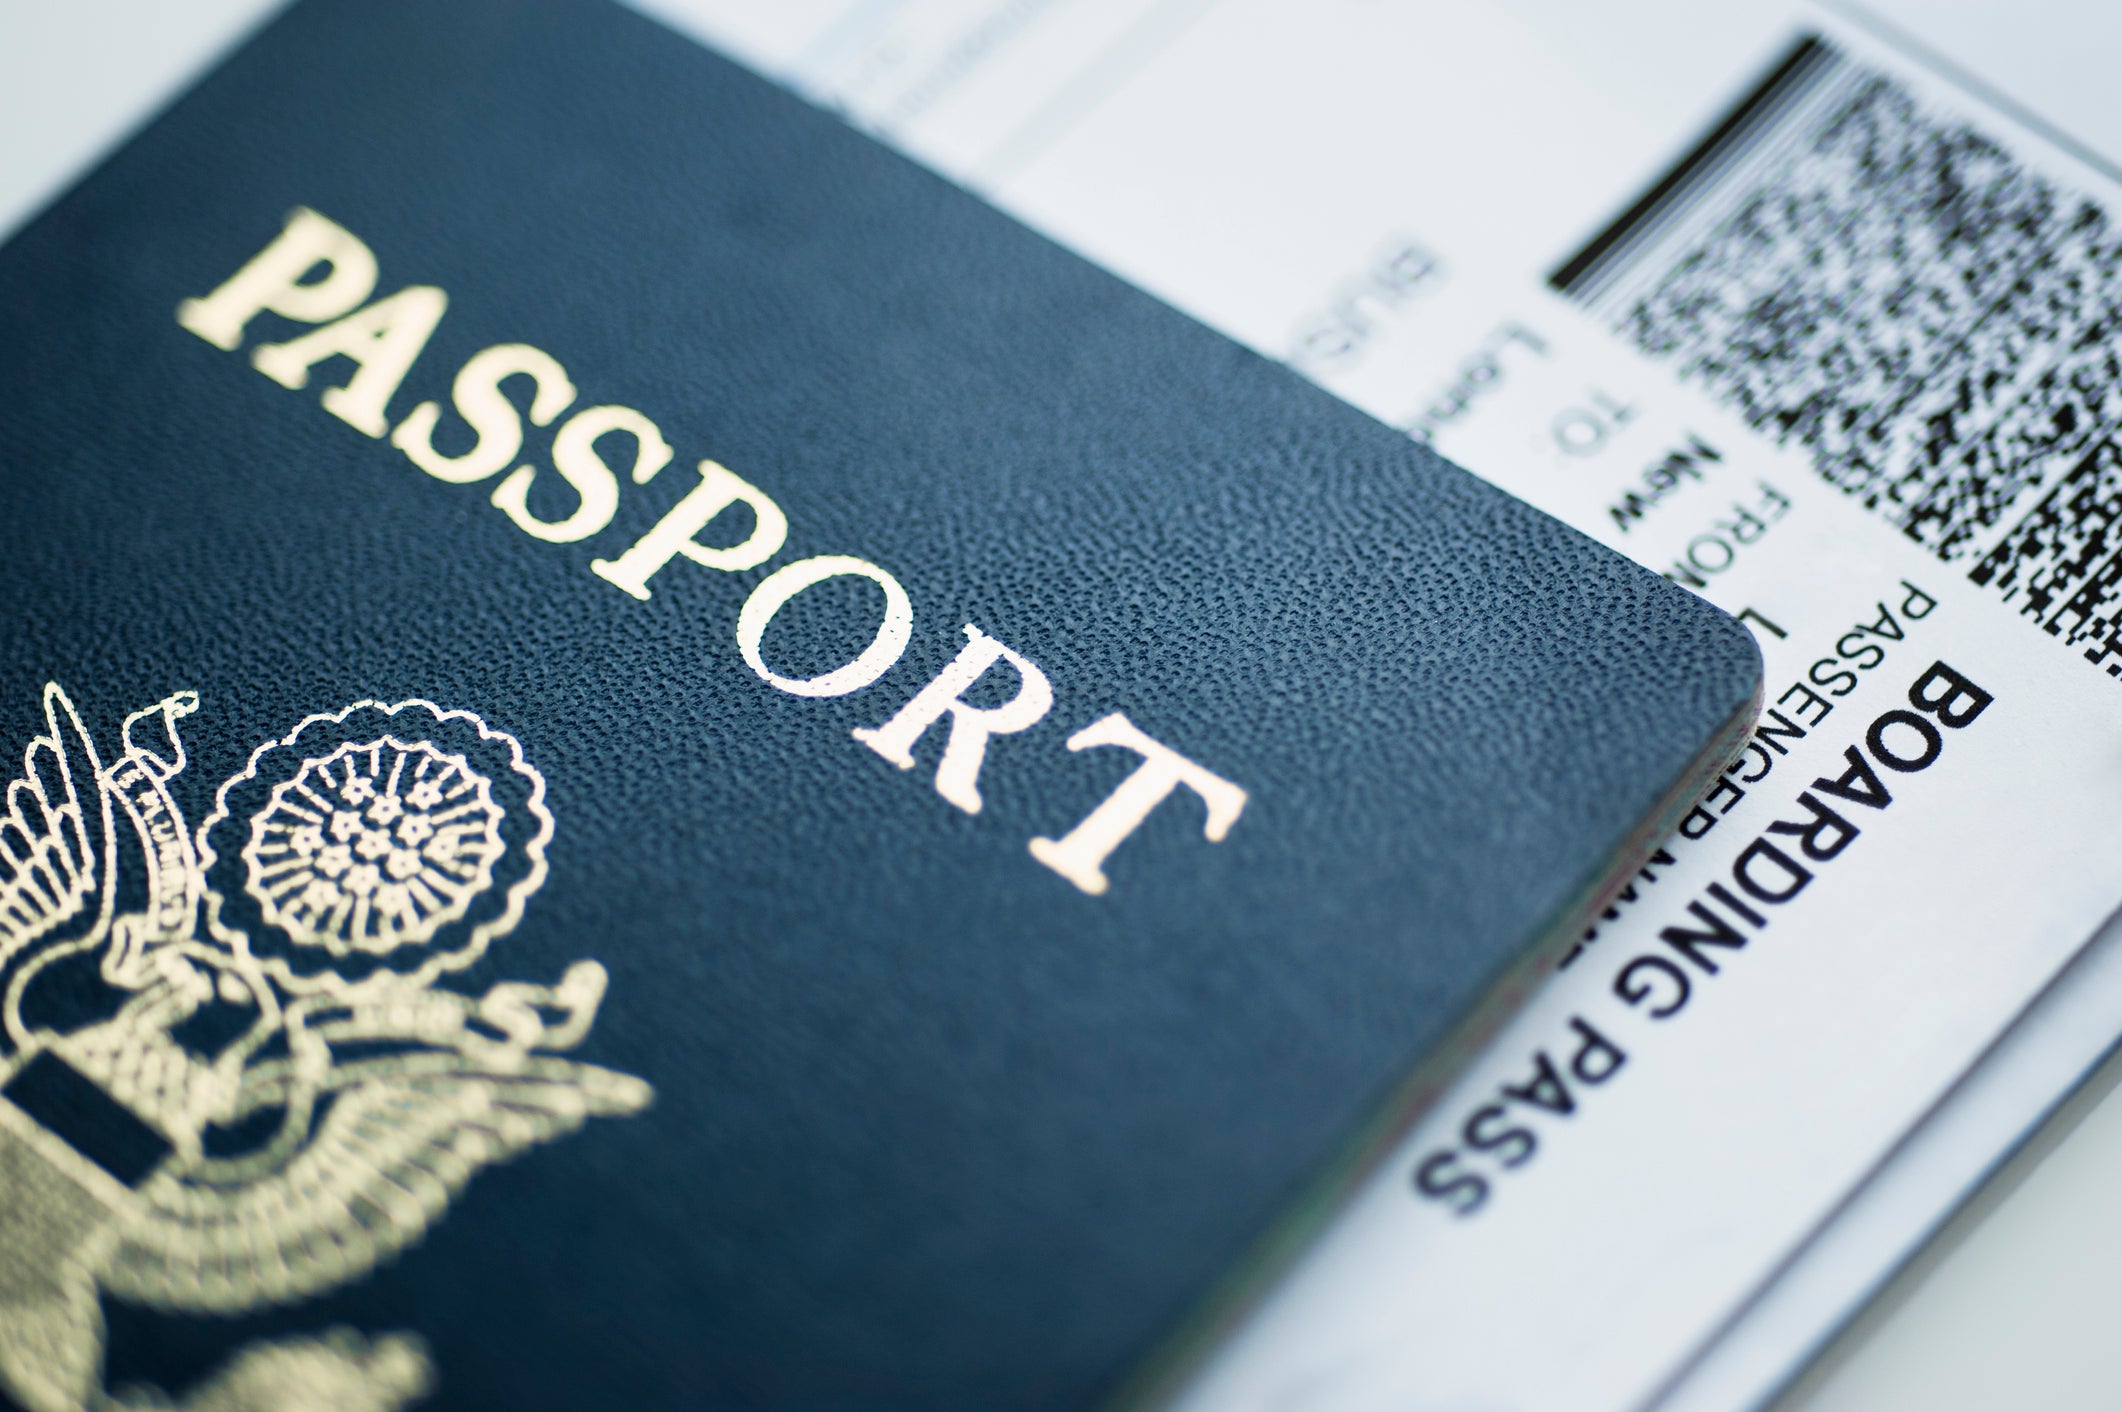 US expands gender passport identification options - The Points Guy